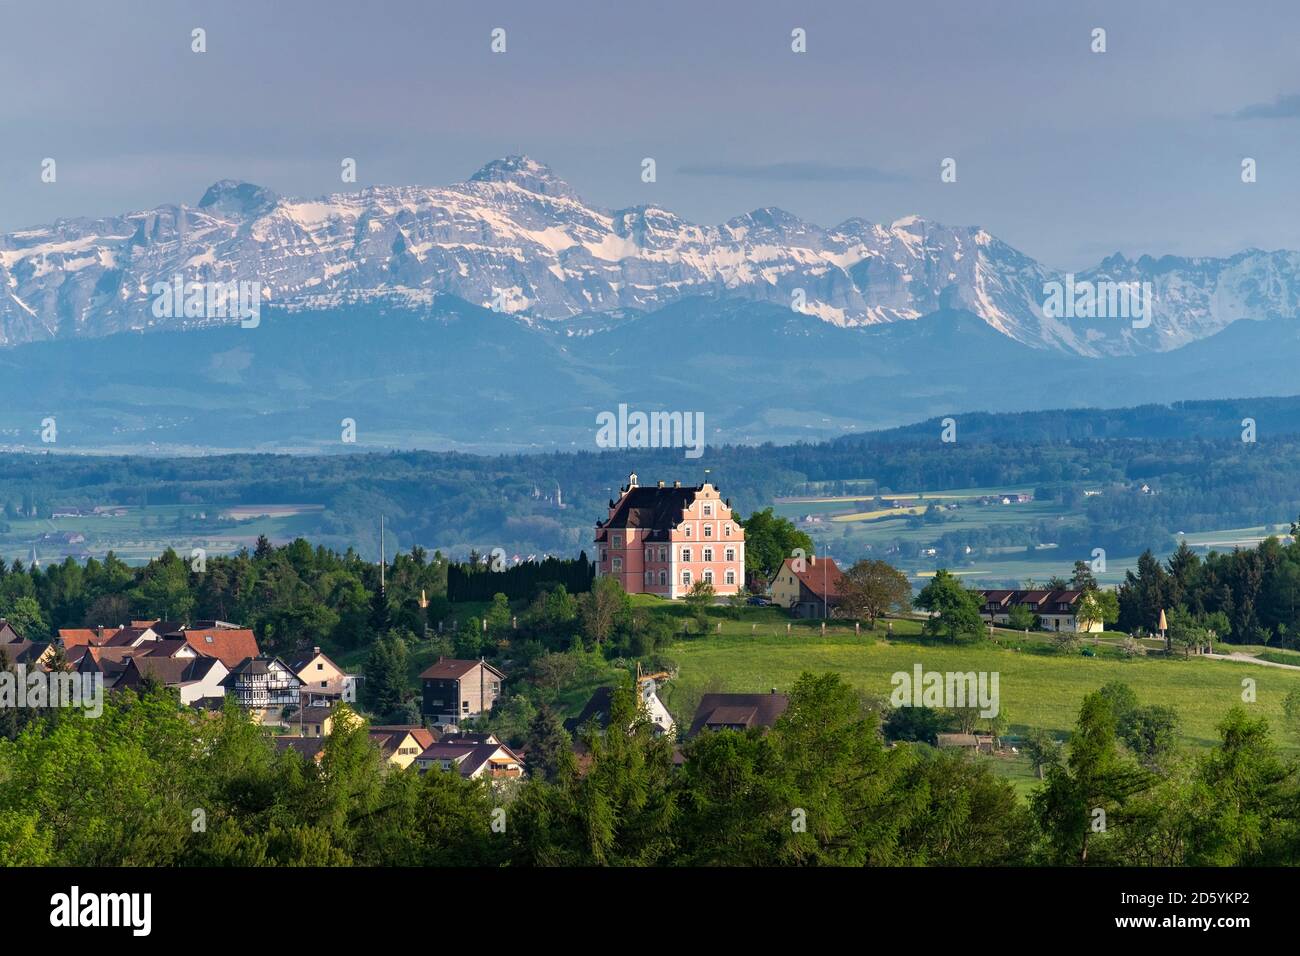 Germany, Baden-Wuerttemberg, Constance district, View over Bodanrueck to Freudental Castle, in the backgrount Swiss Alps with Saentis Stock Photo